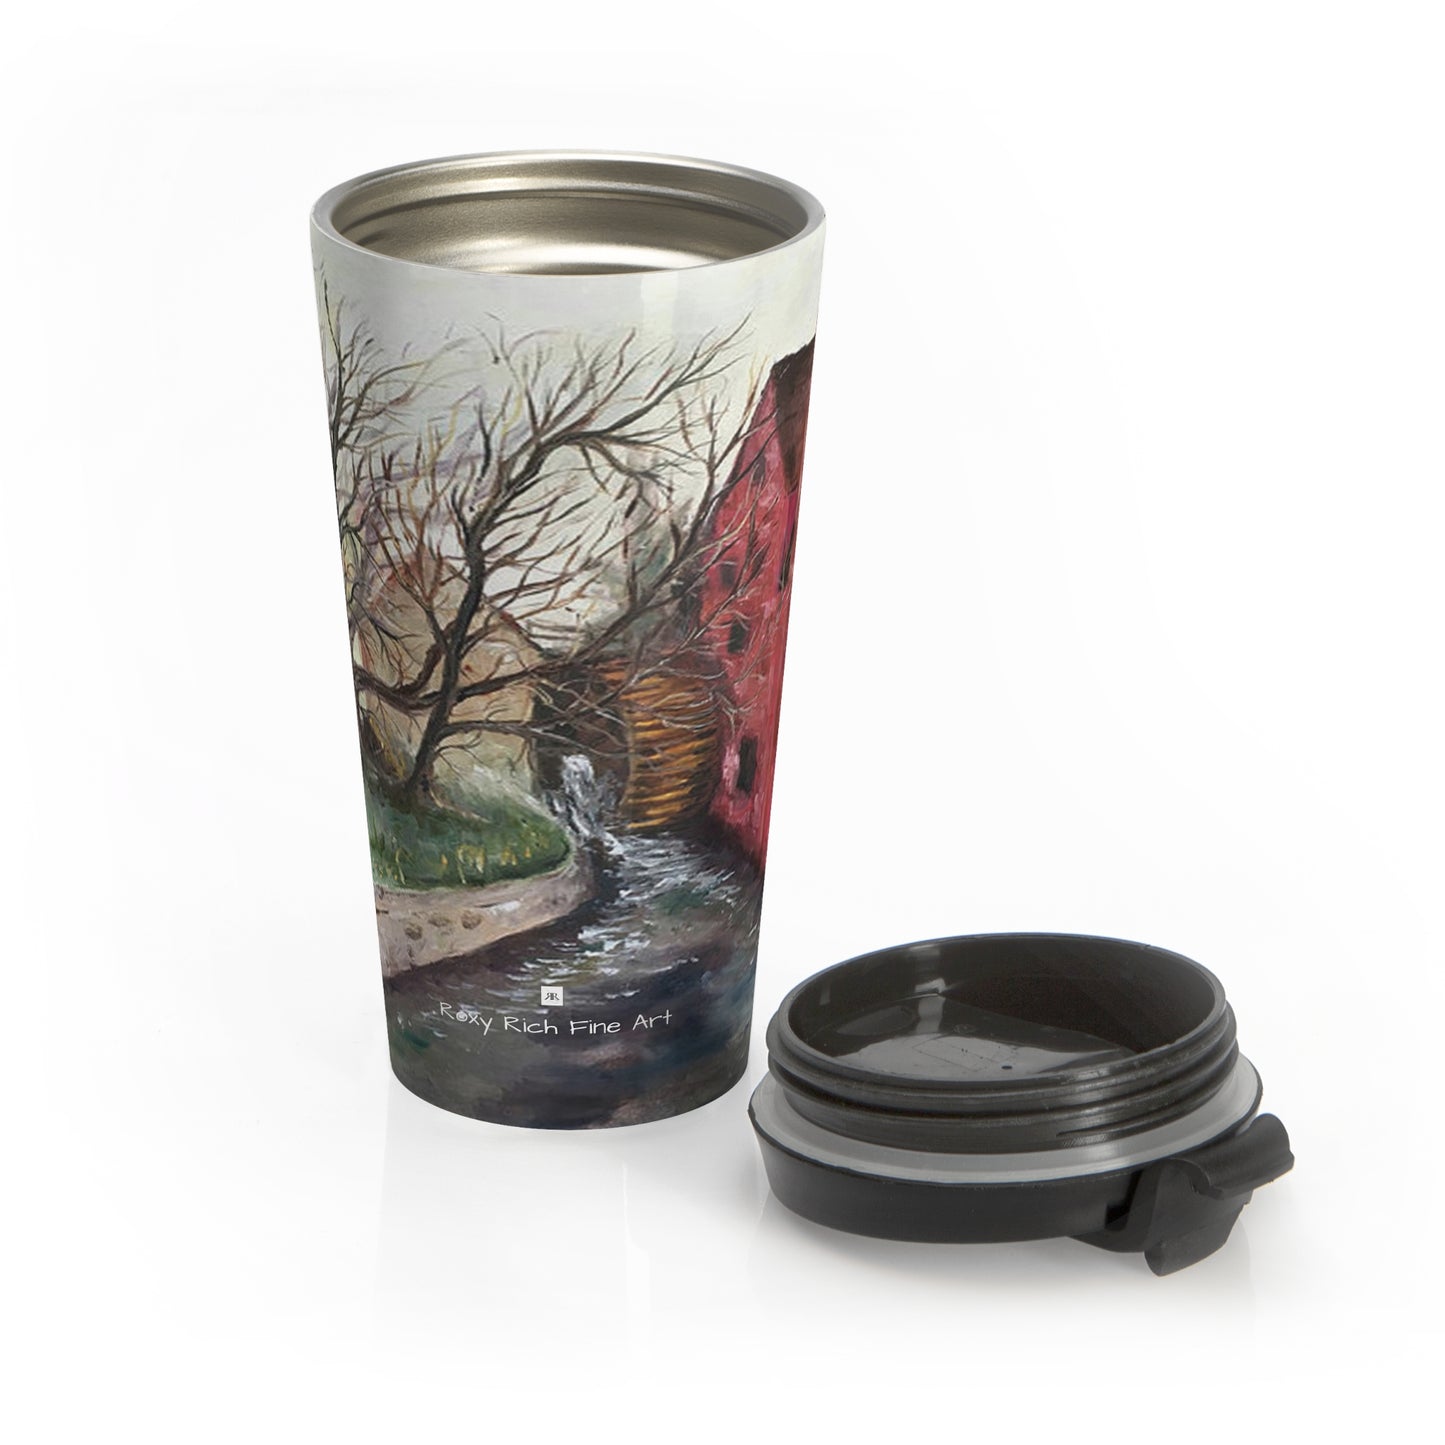 The Old Mill (Water Wheel) Cotswolds Stainless Steel Travel Mug